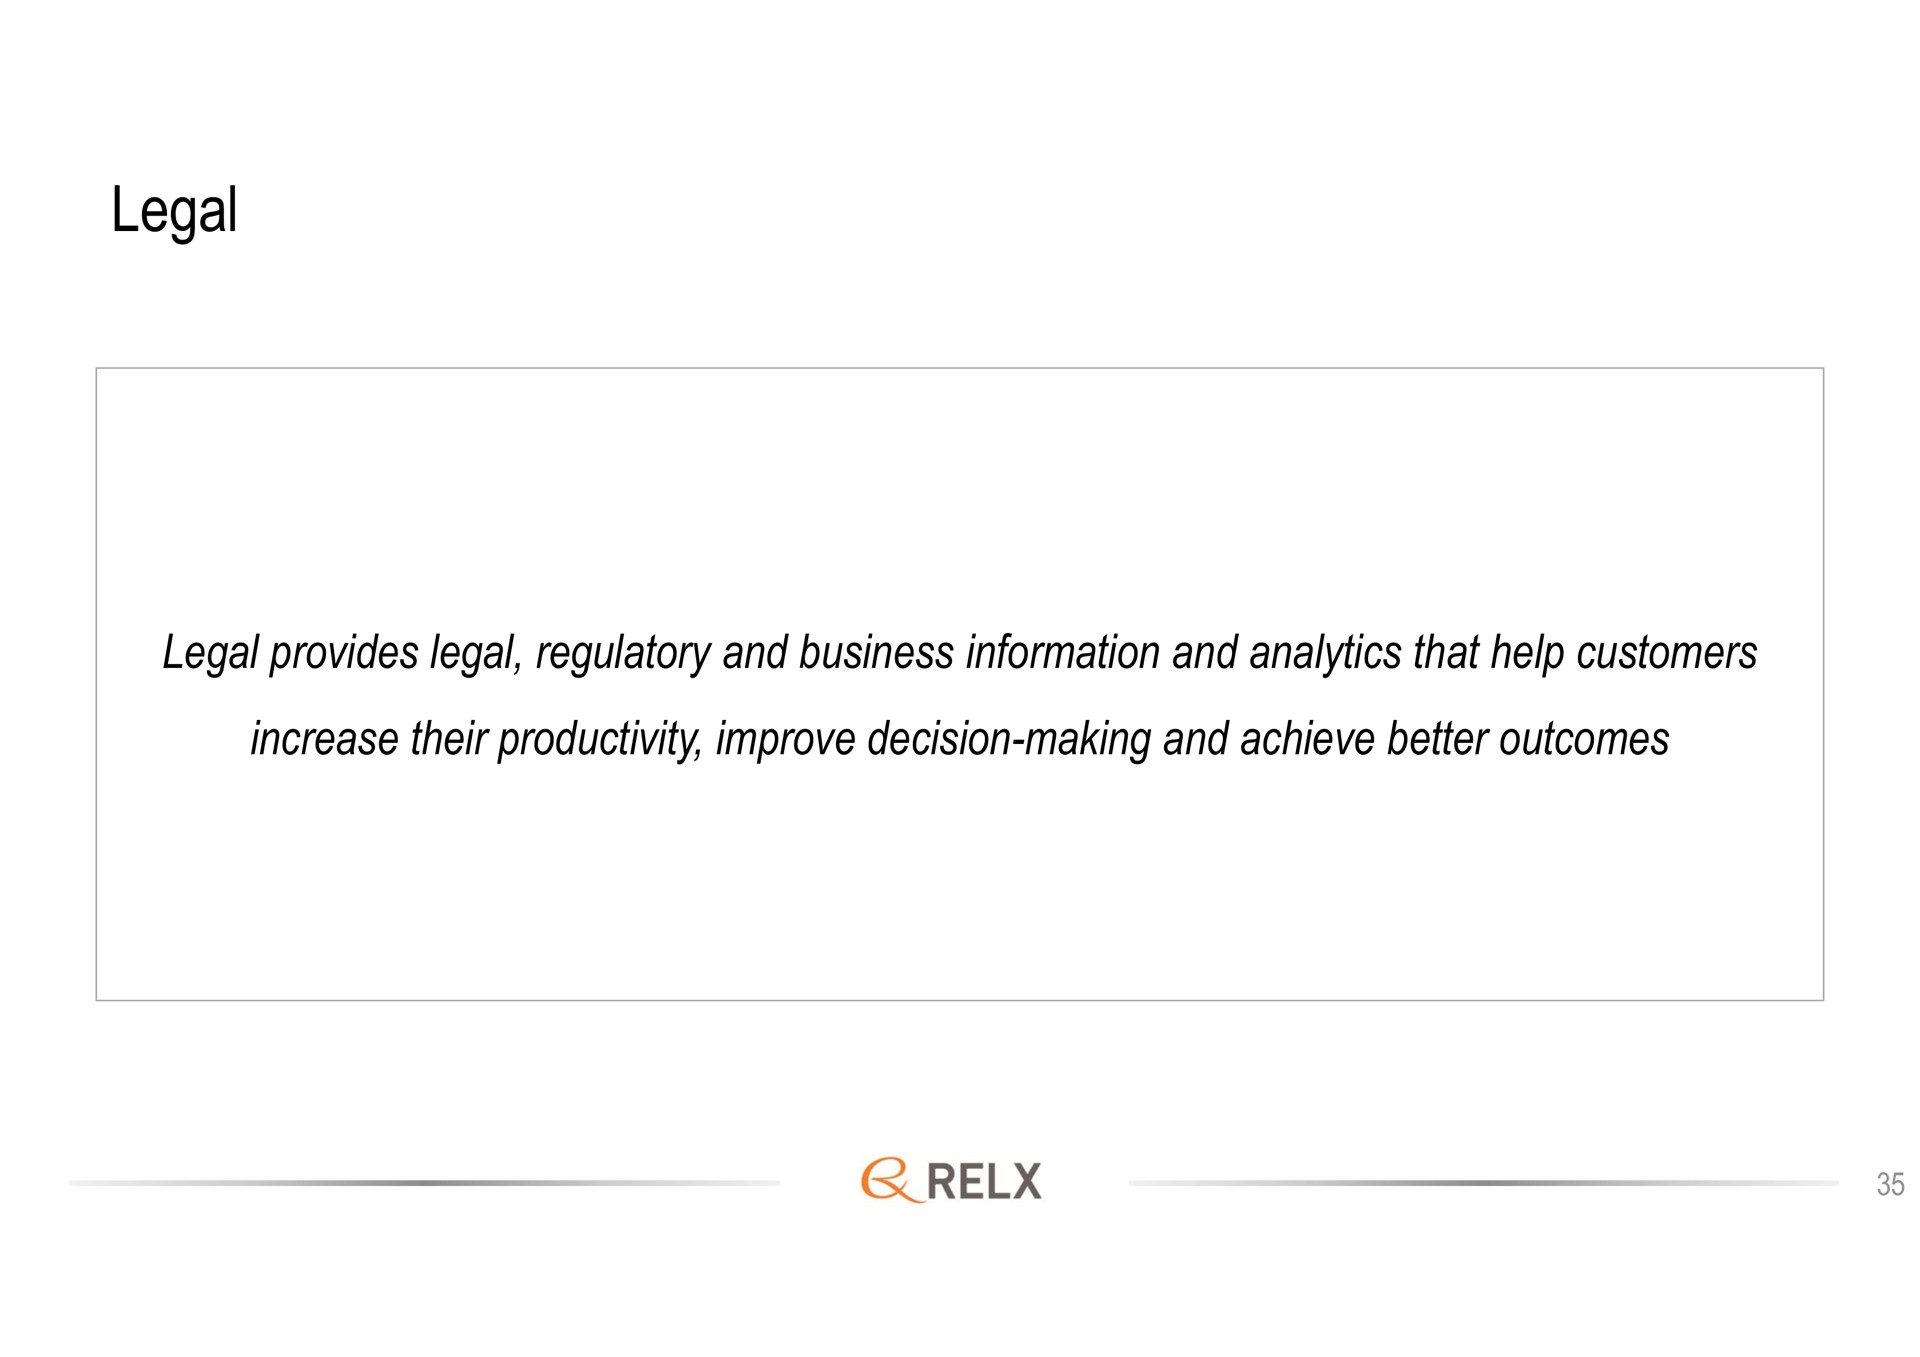 legal legal provides legal regulatory and business information and analytics that help customers increase their productivity improve decision making and achieve better outcomes | RELX